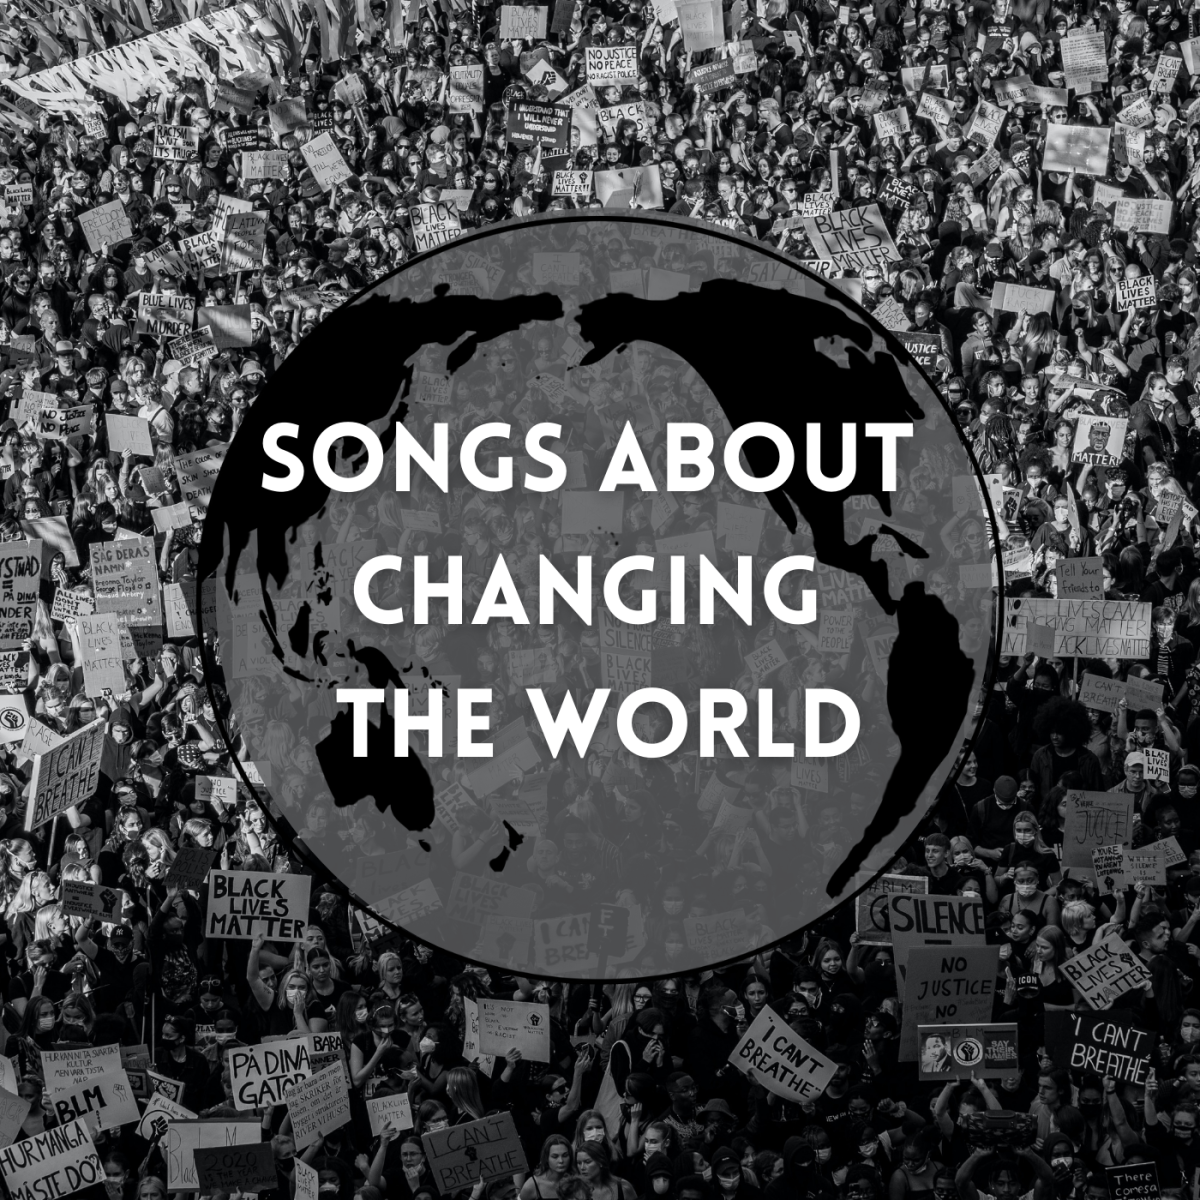 Whatever your social cause is, become an activist and make positive change now. Get inspired with a playlist of pop, rock, country, and hip-hop songs about changing the world.